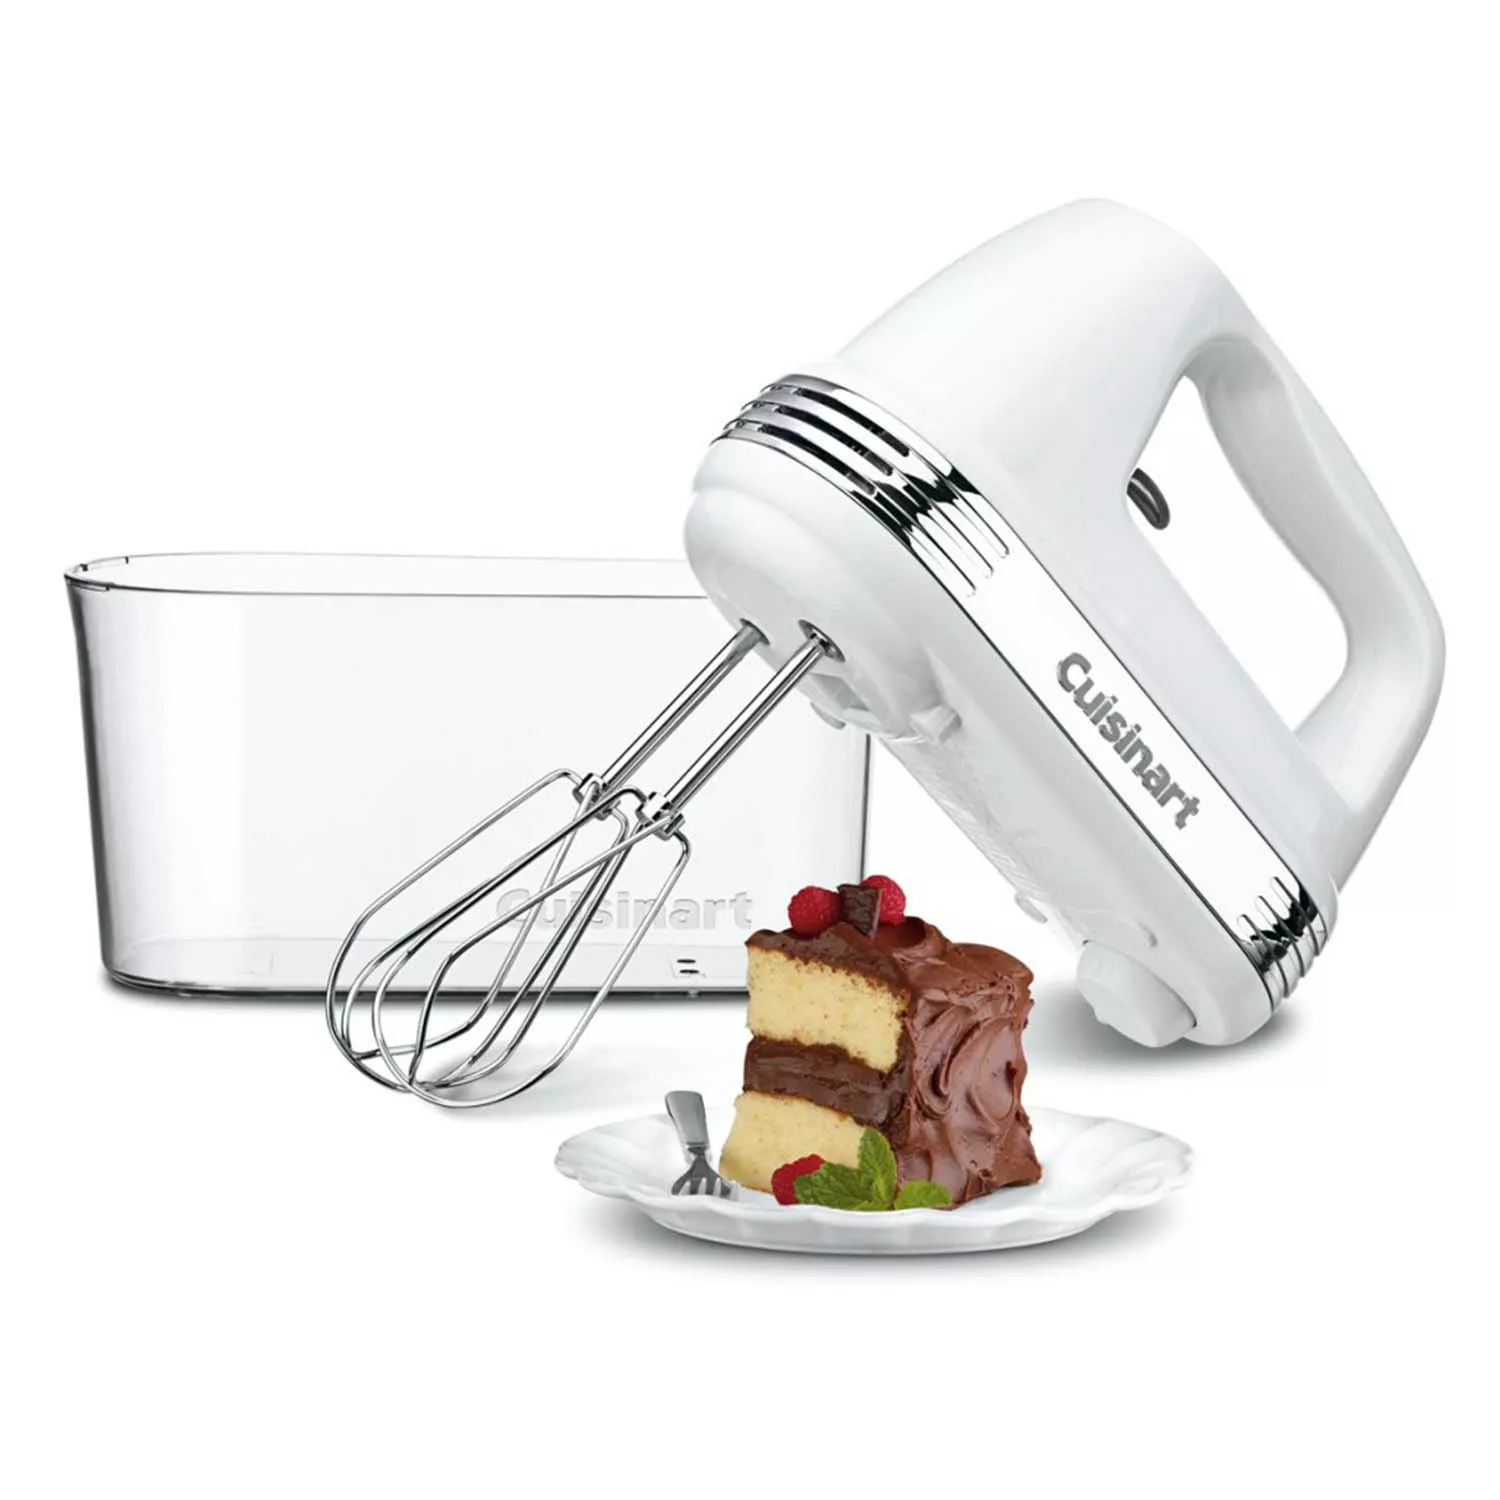 Elite Gourmet 5 Speed Hand Mixer W/ Stand & Bowl for sale online